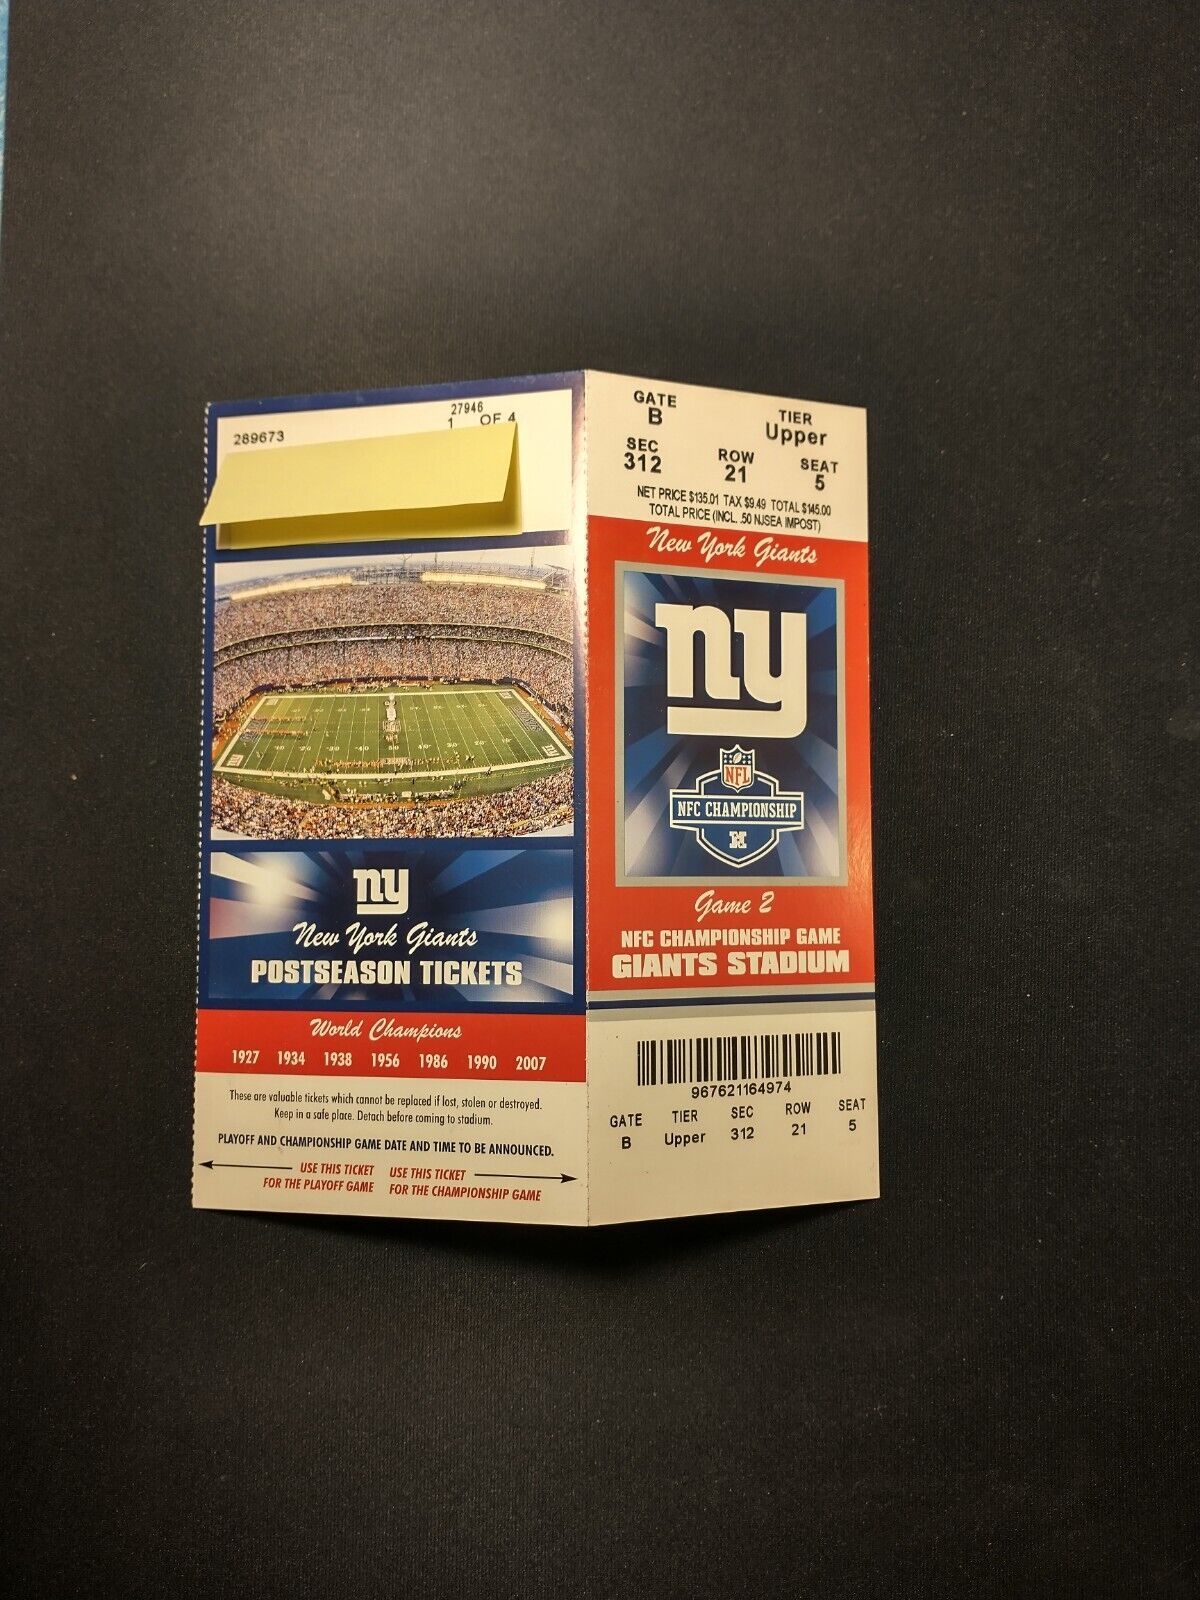 N.Y. Giants Vs Green Bay Packers Ticket Stub, Game 2 NFC Championship Game.2010